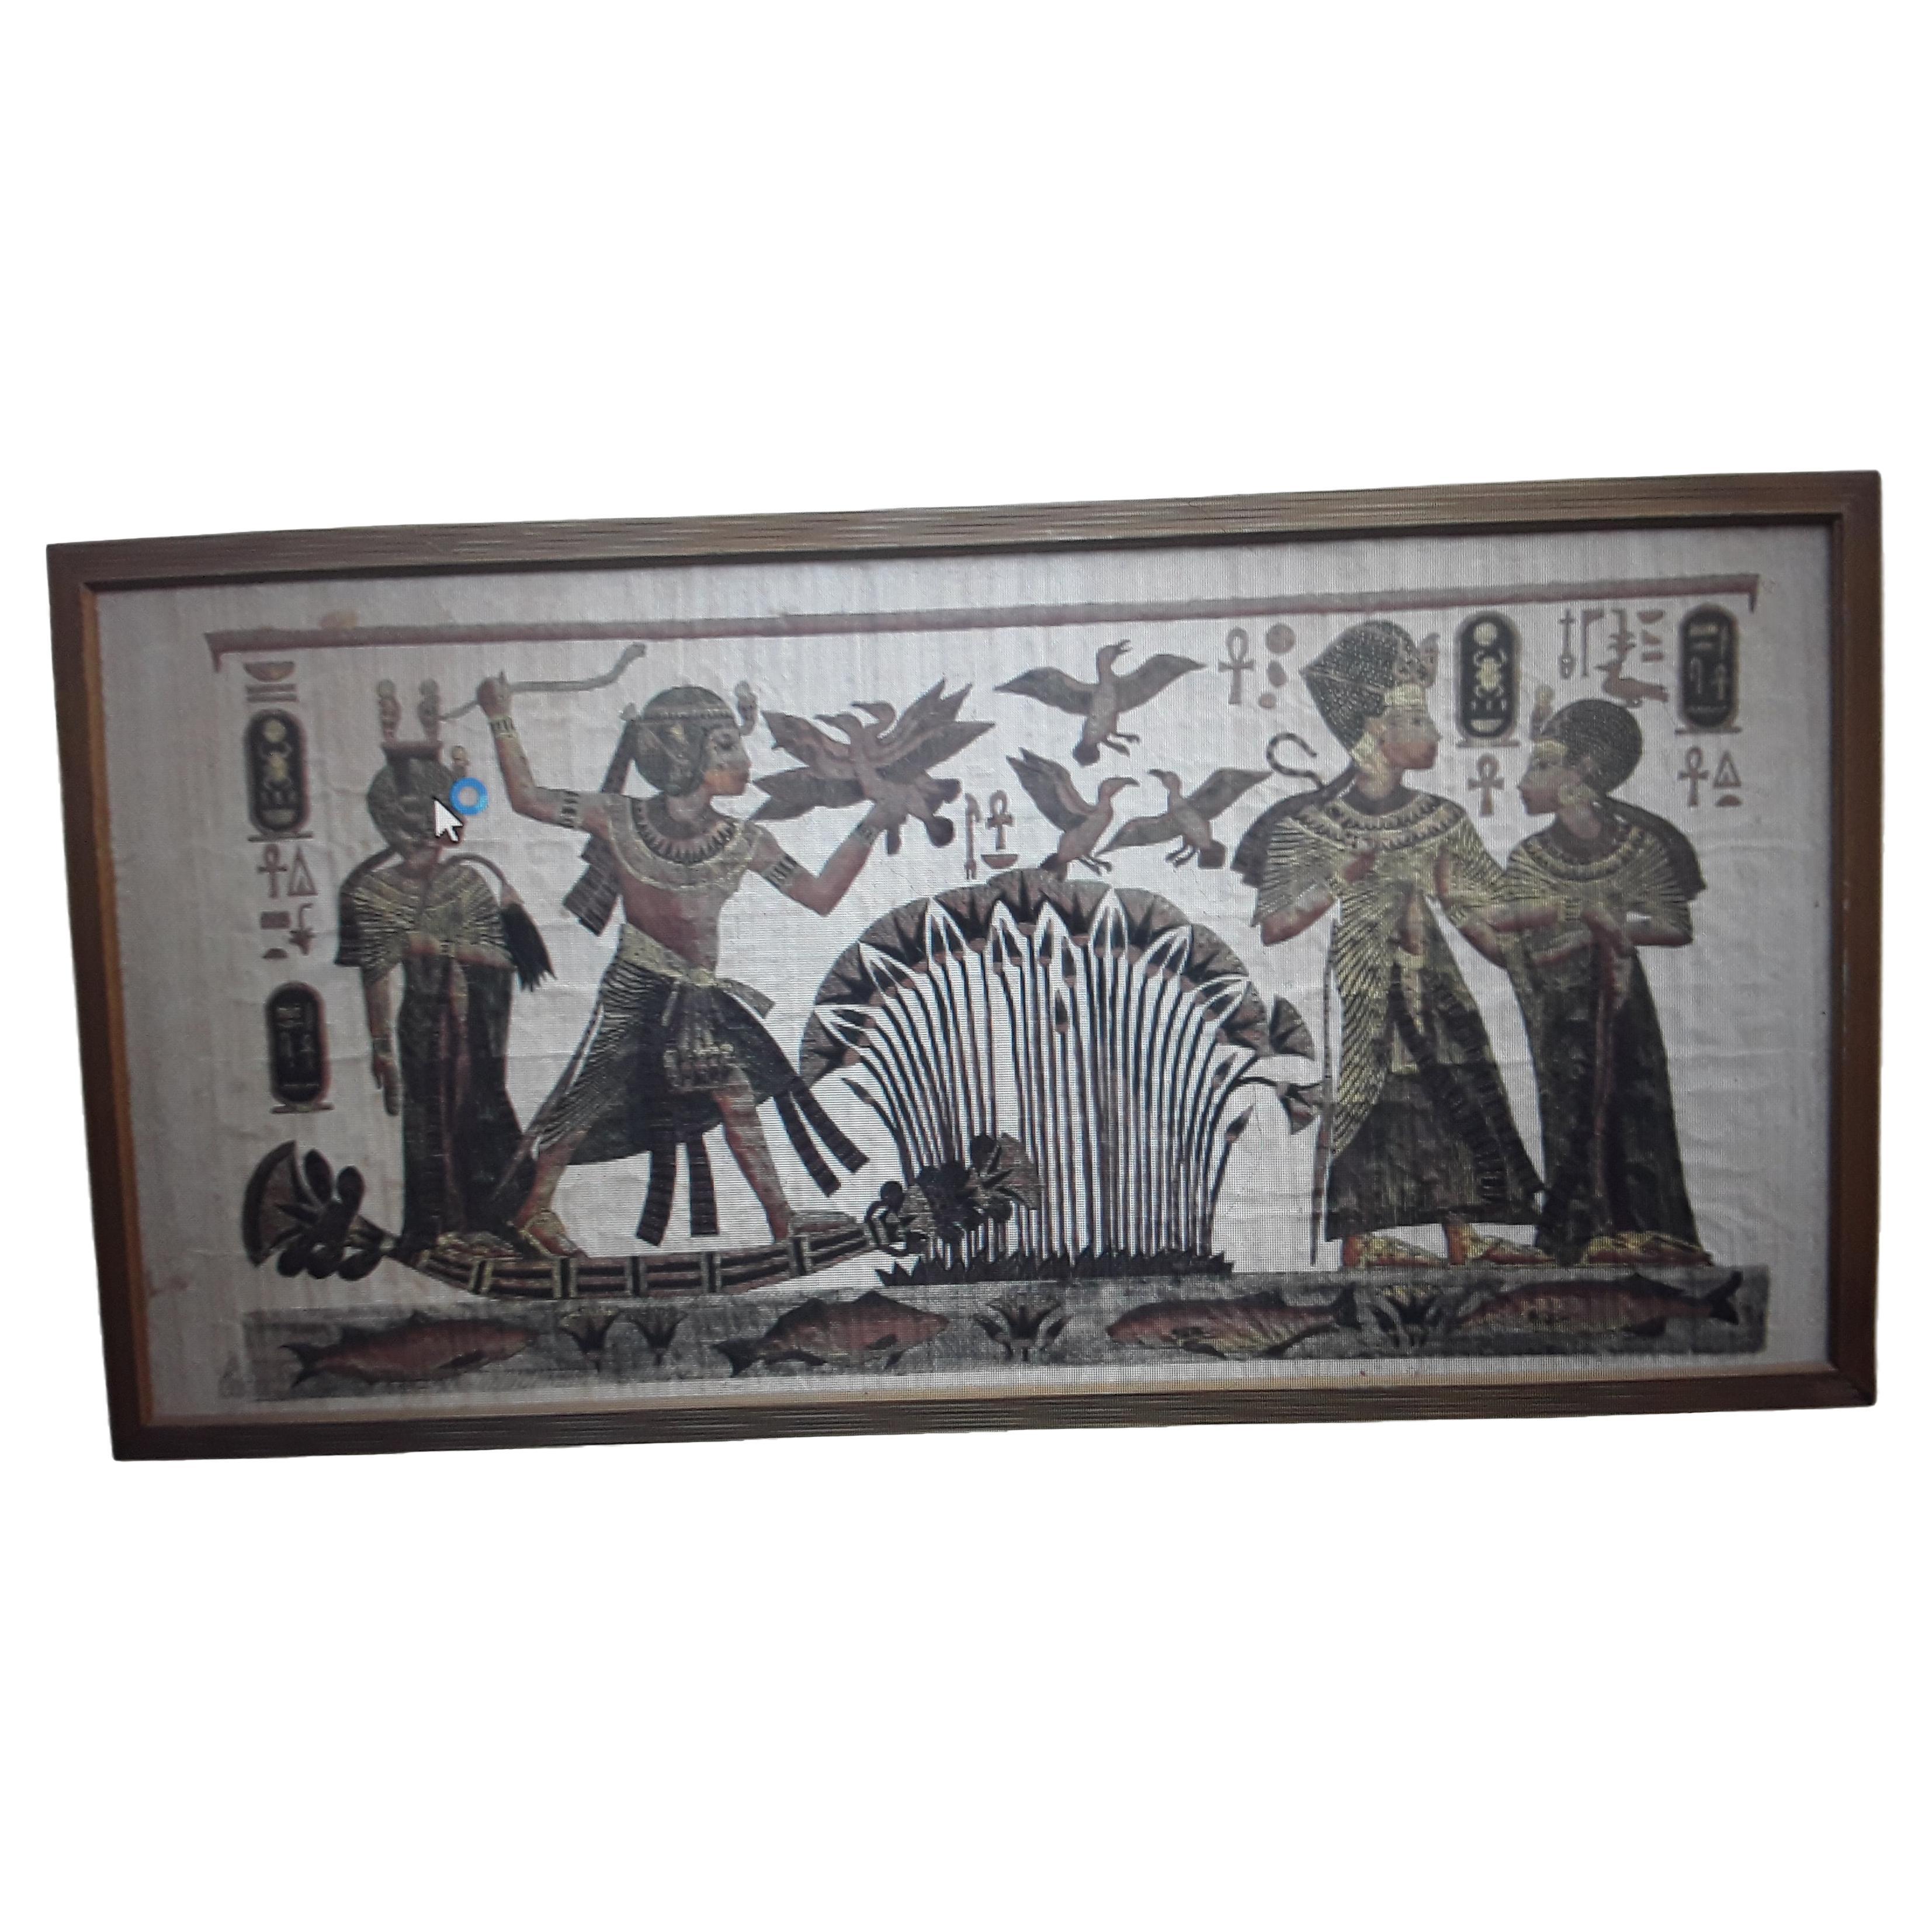 1960's Mid Century Modern Large Egyptian Themed Painting on Aged Parchment Paper For Sale